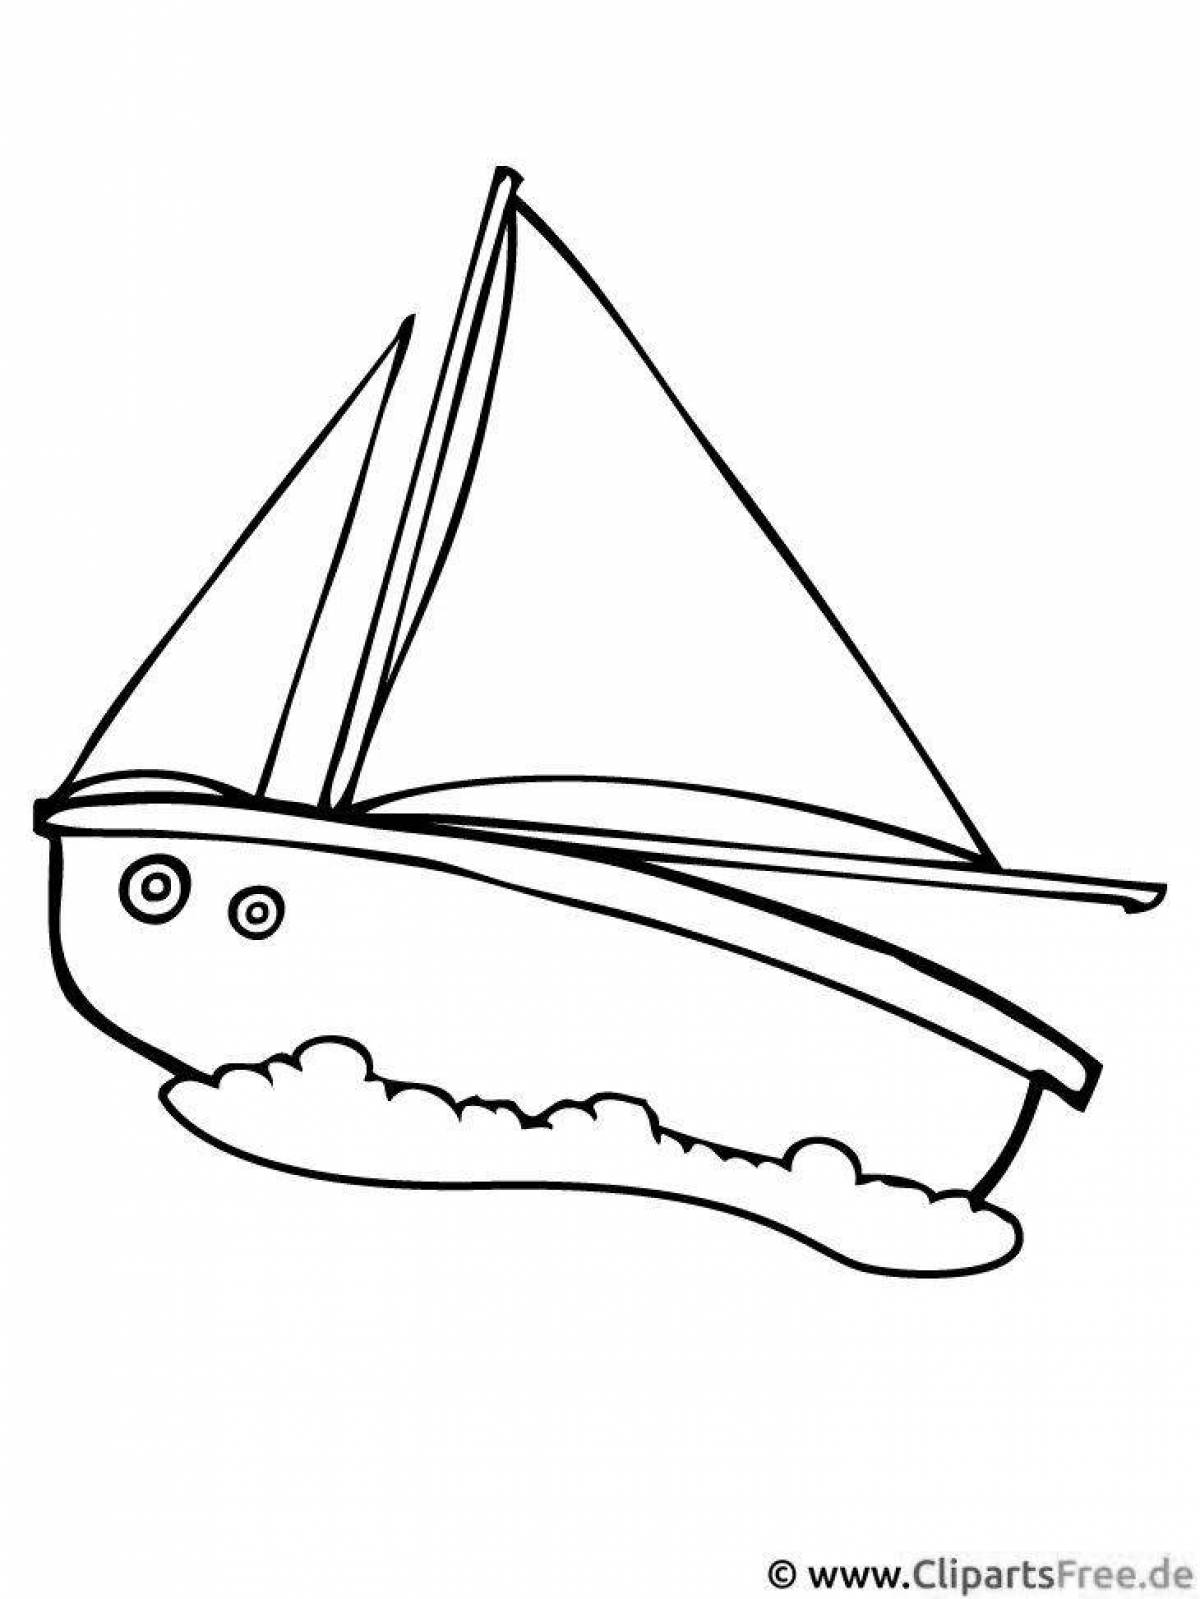 Vivid coloring of the yacht for children